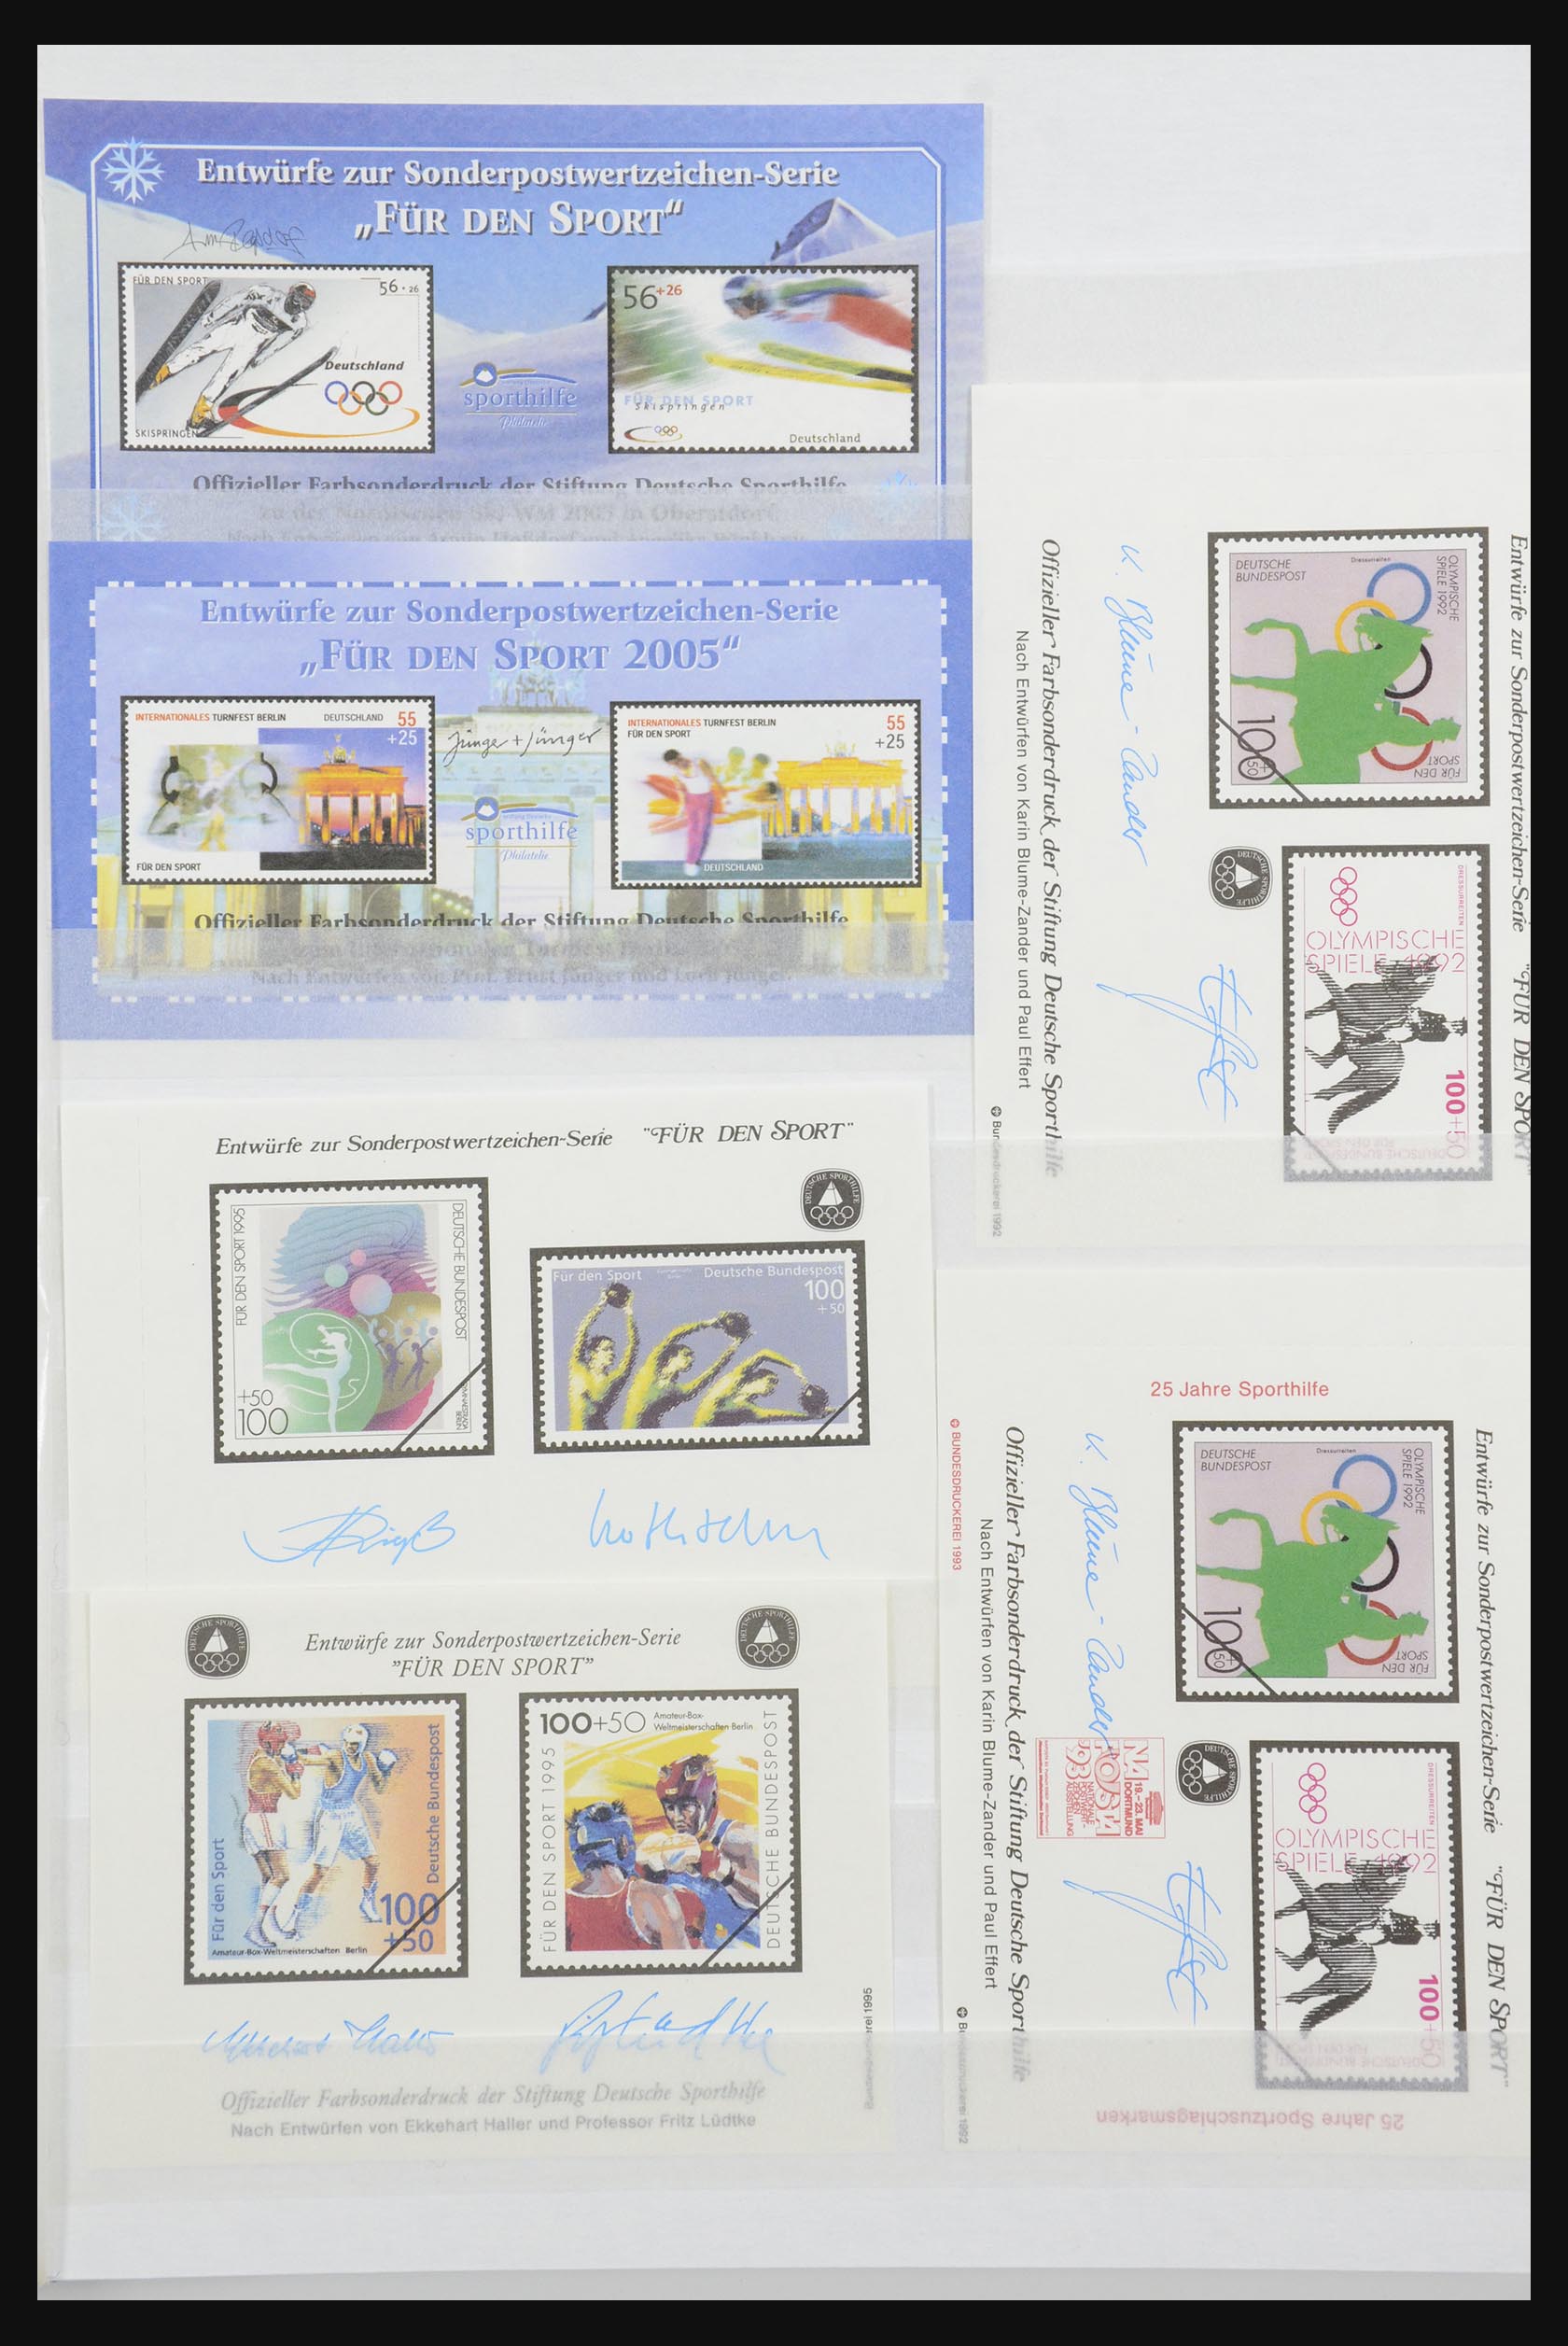 32050 007 - 32050 Bundespost special sheets 1980-2010.